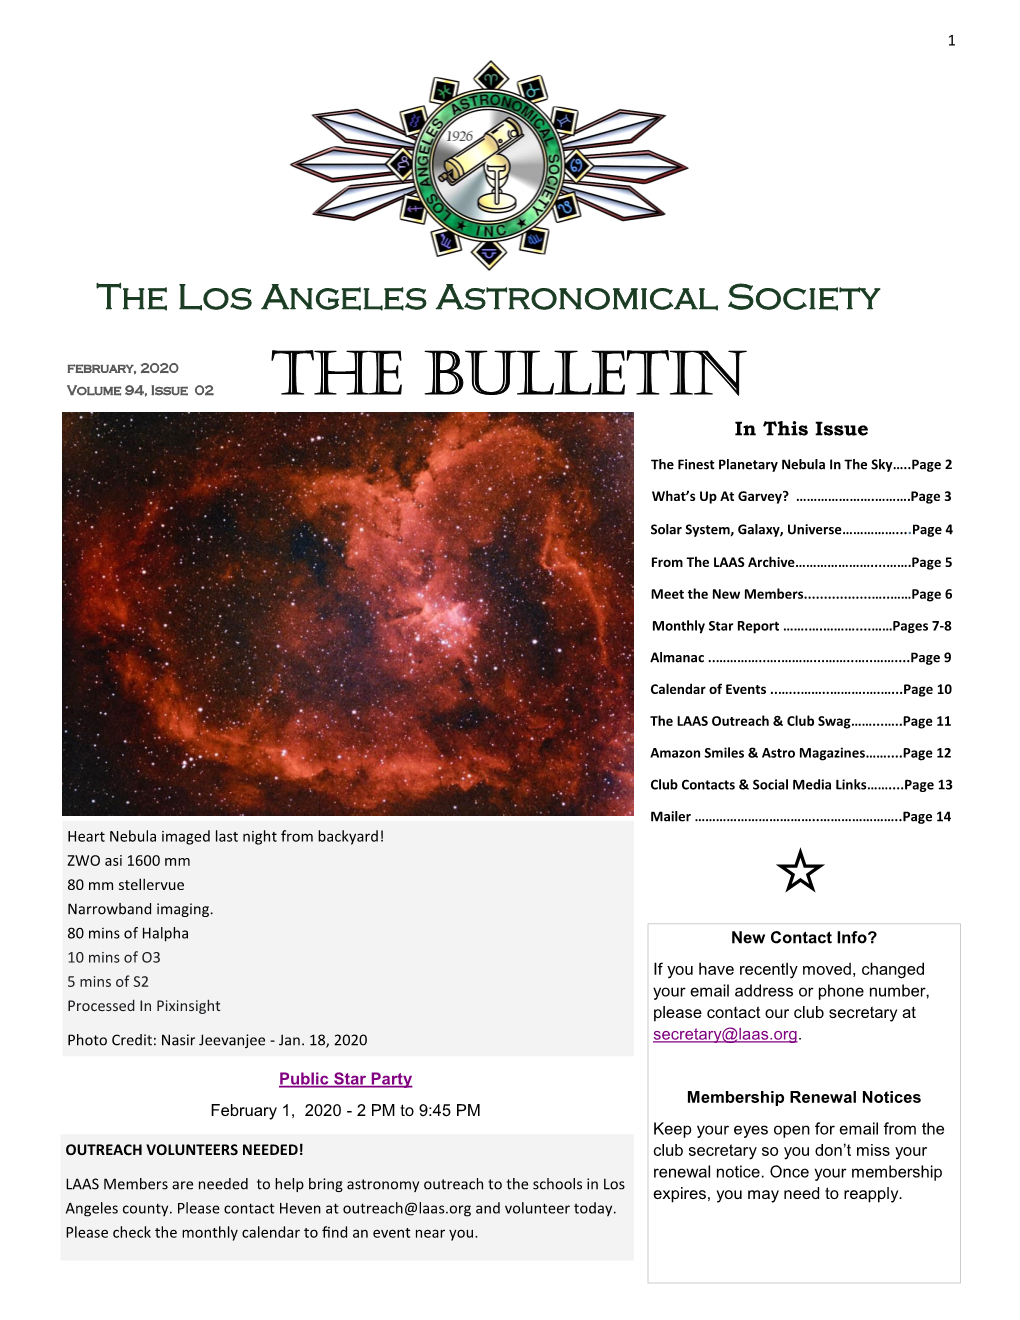 The Bulletin Volume 94, Issue 02